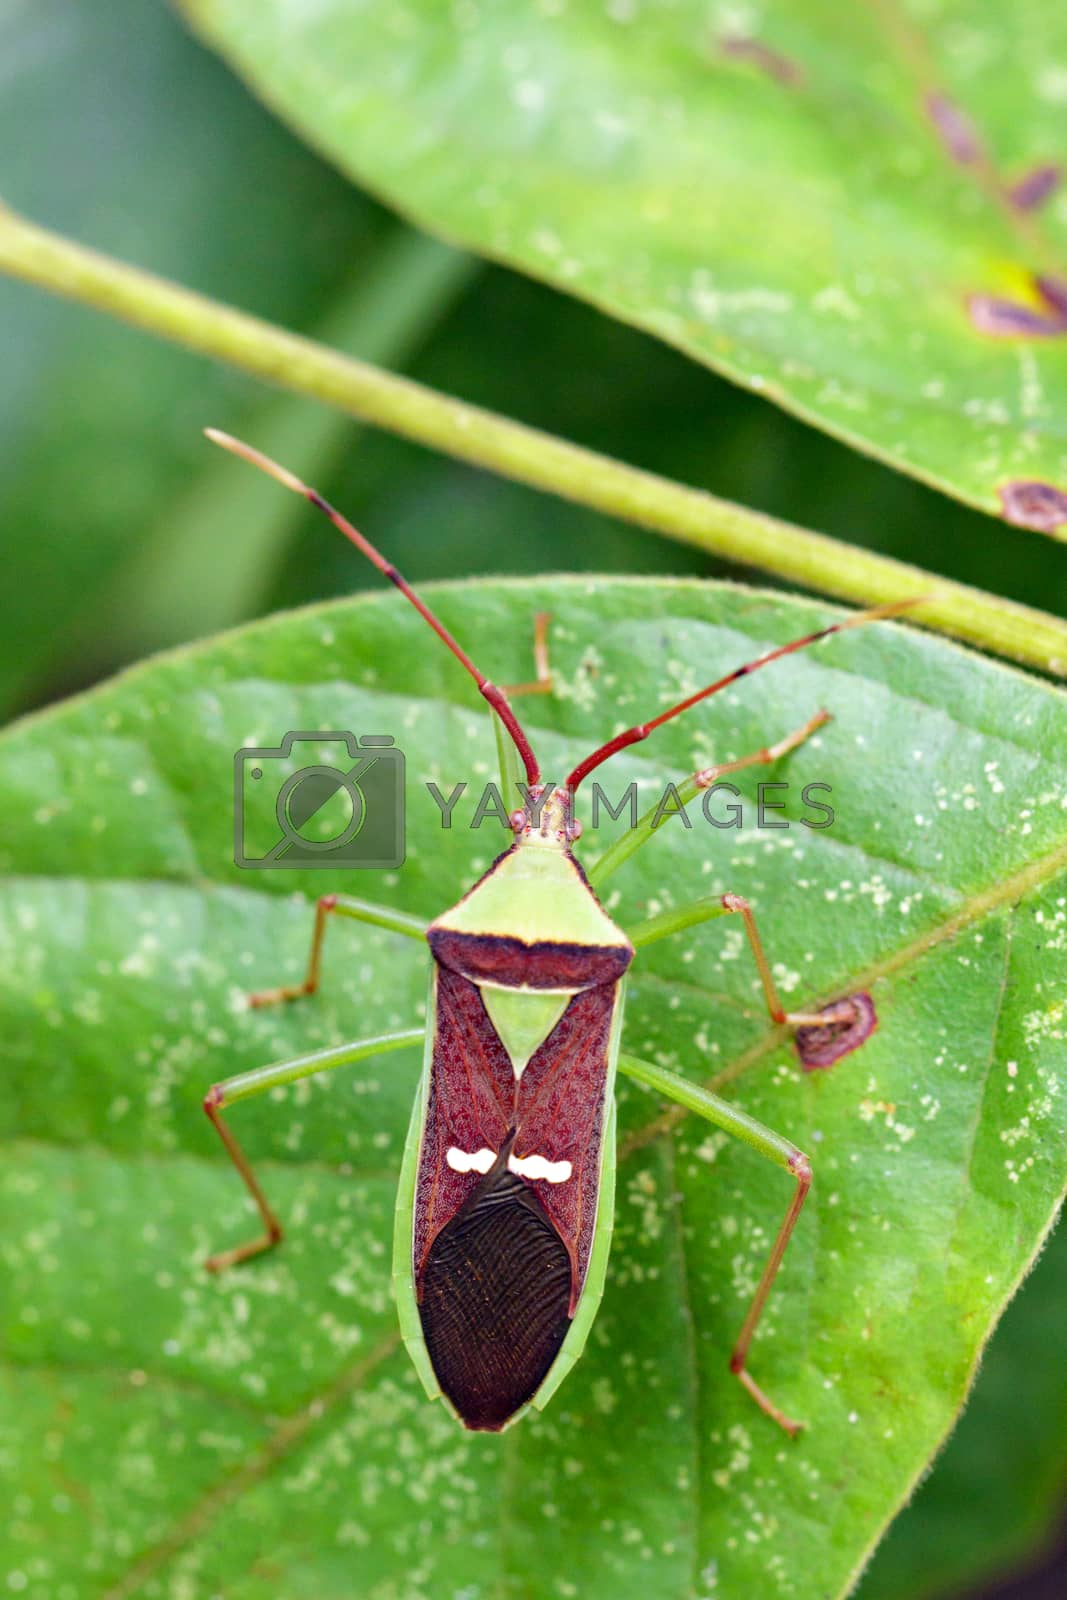 Royalty free image of Image of green legume pod bug(Hemiptera) on a green leaf. Insect by yod67